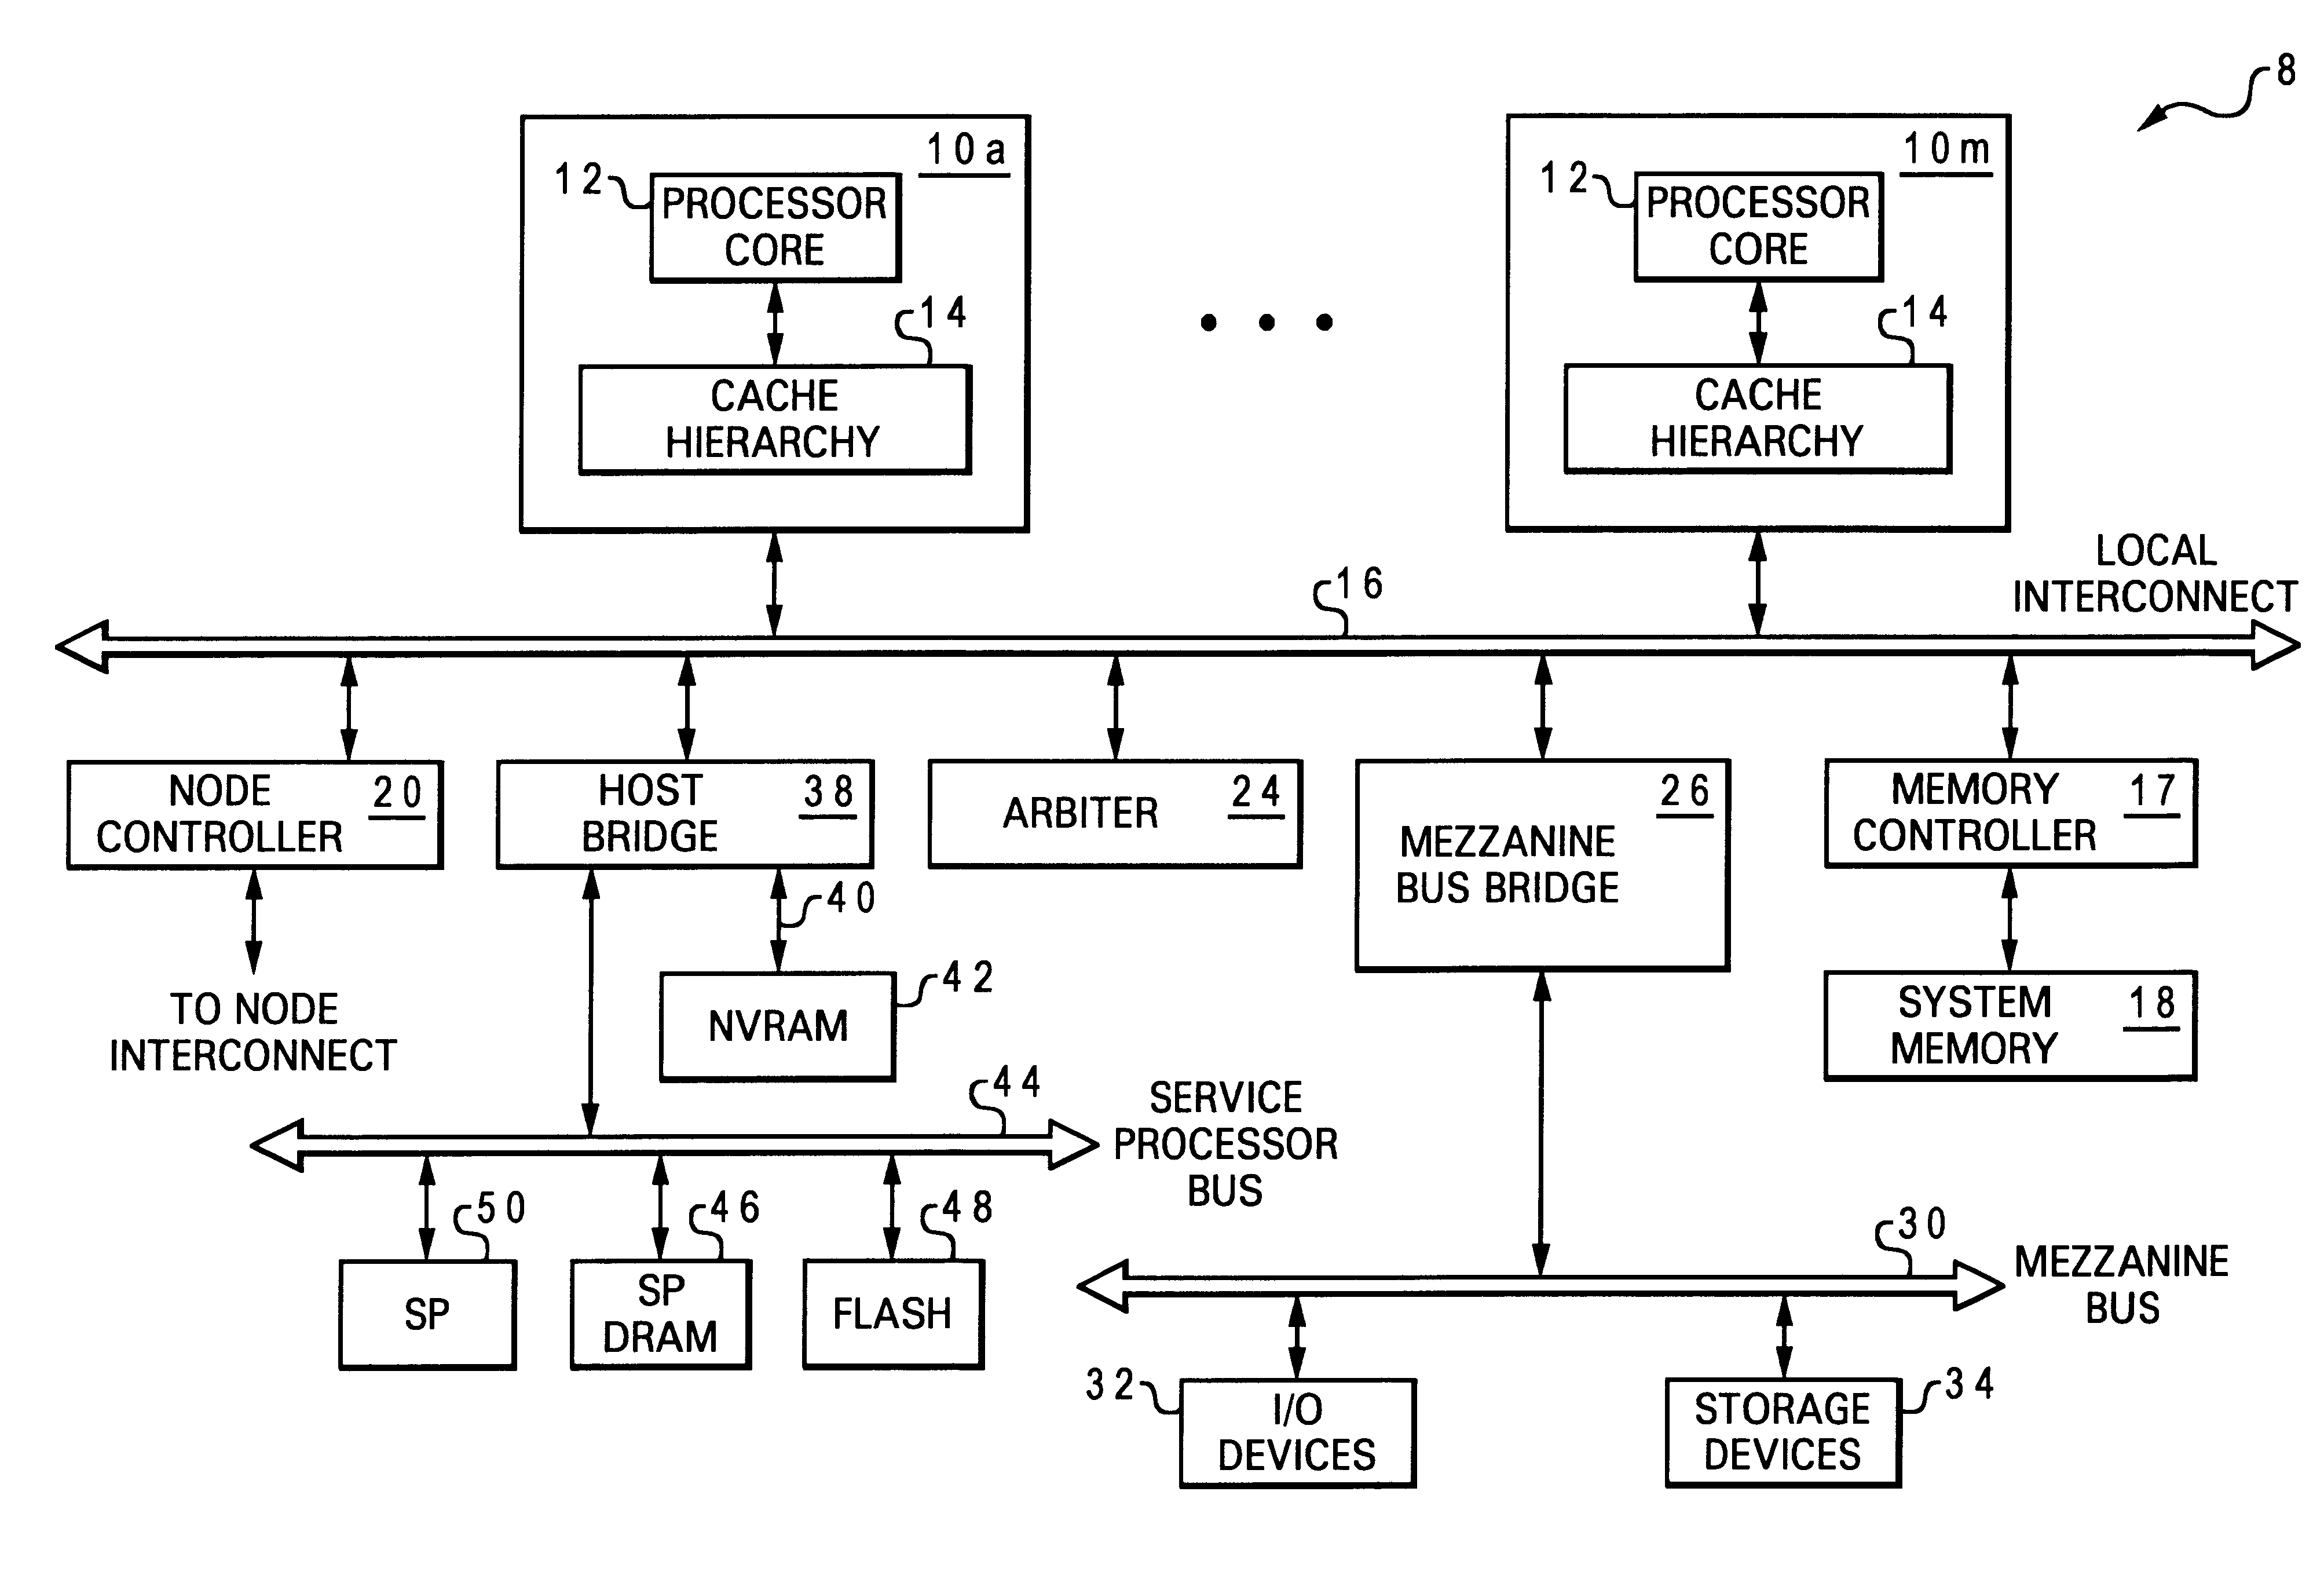 Interconnected processing nodes configurable as at least one non-uniform memory access (NUMA) data processing system